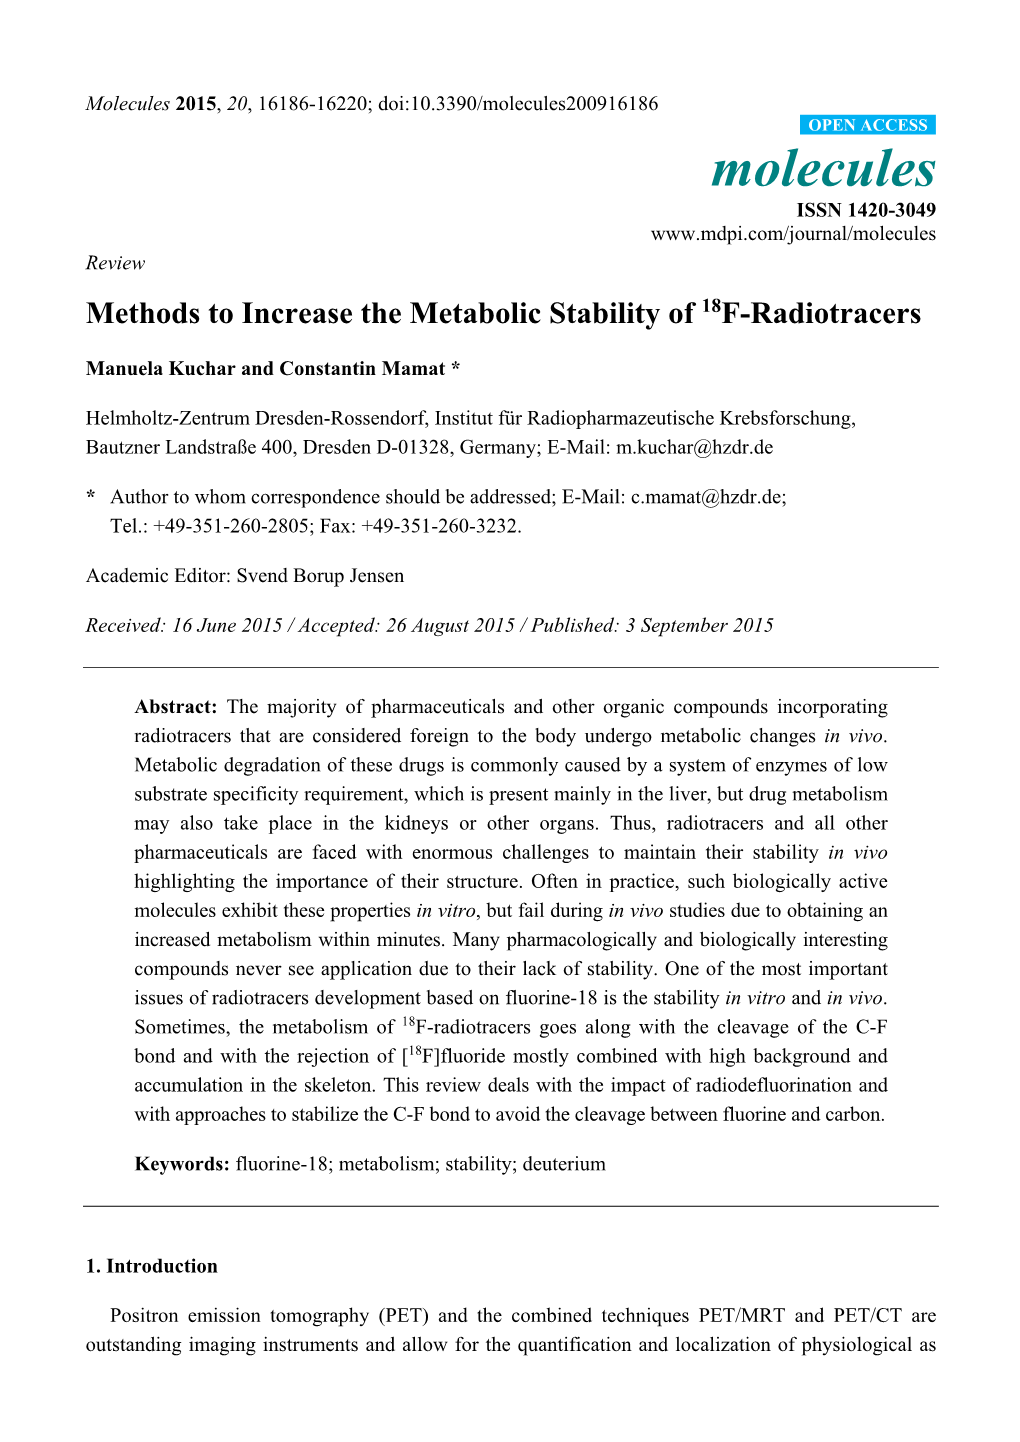 Methods to Increase the Metabolic Stability of 18F-Radiotracers